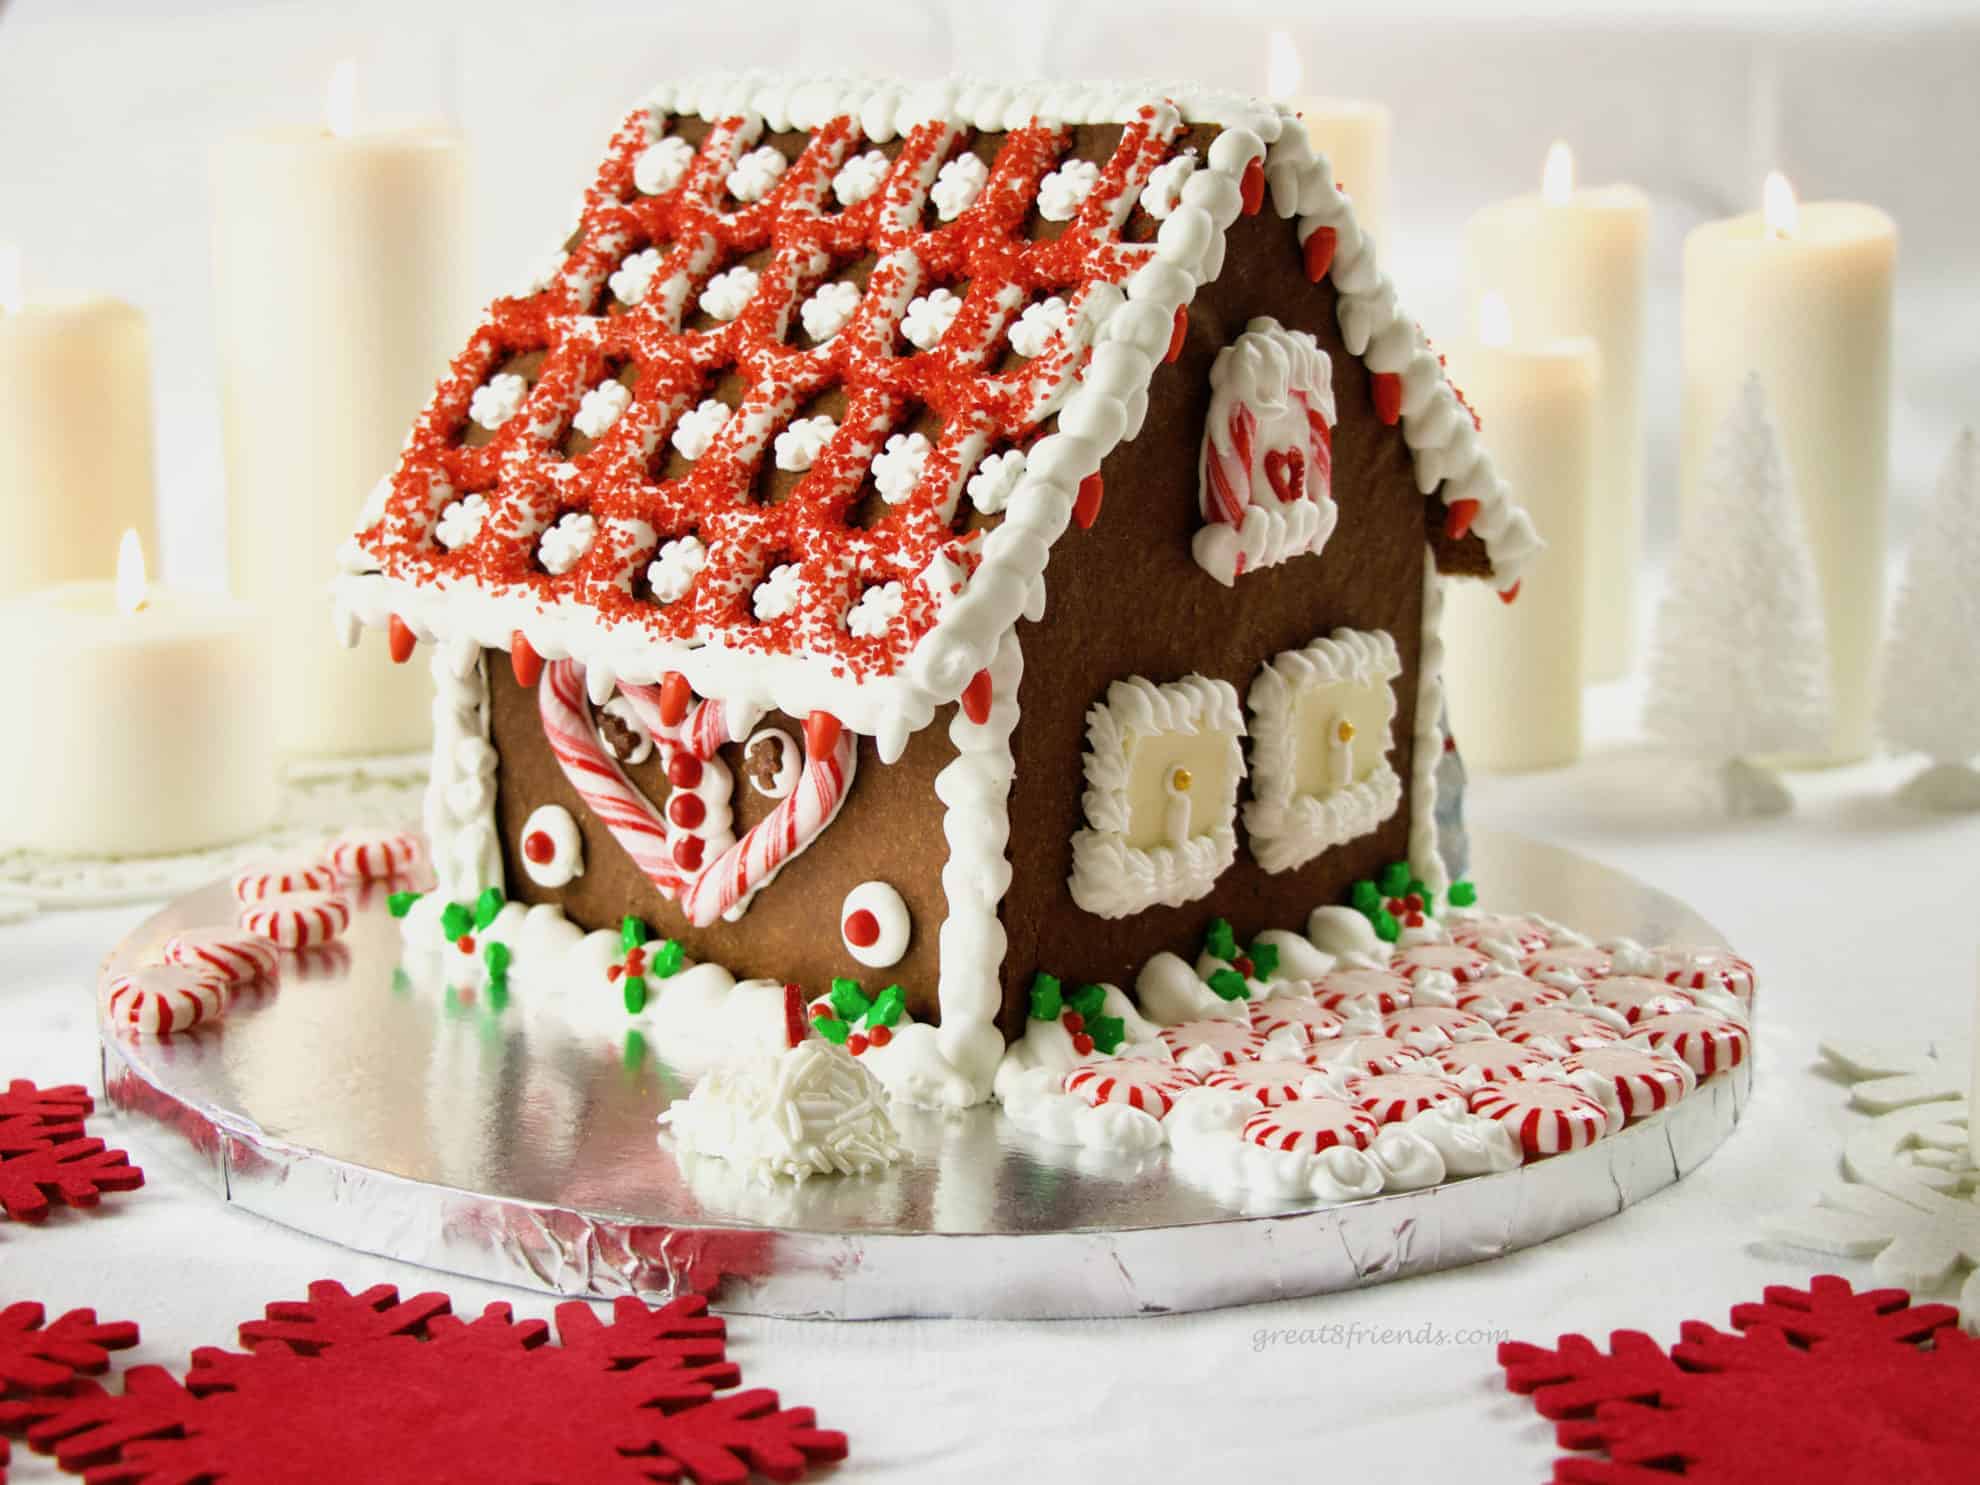 Don't buy a kit, add whimsy and fun to your Christmas by making this DIY Festive Gingerbread House! All the instructions right here.